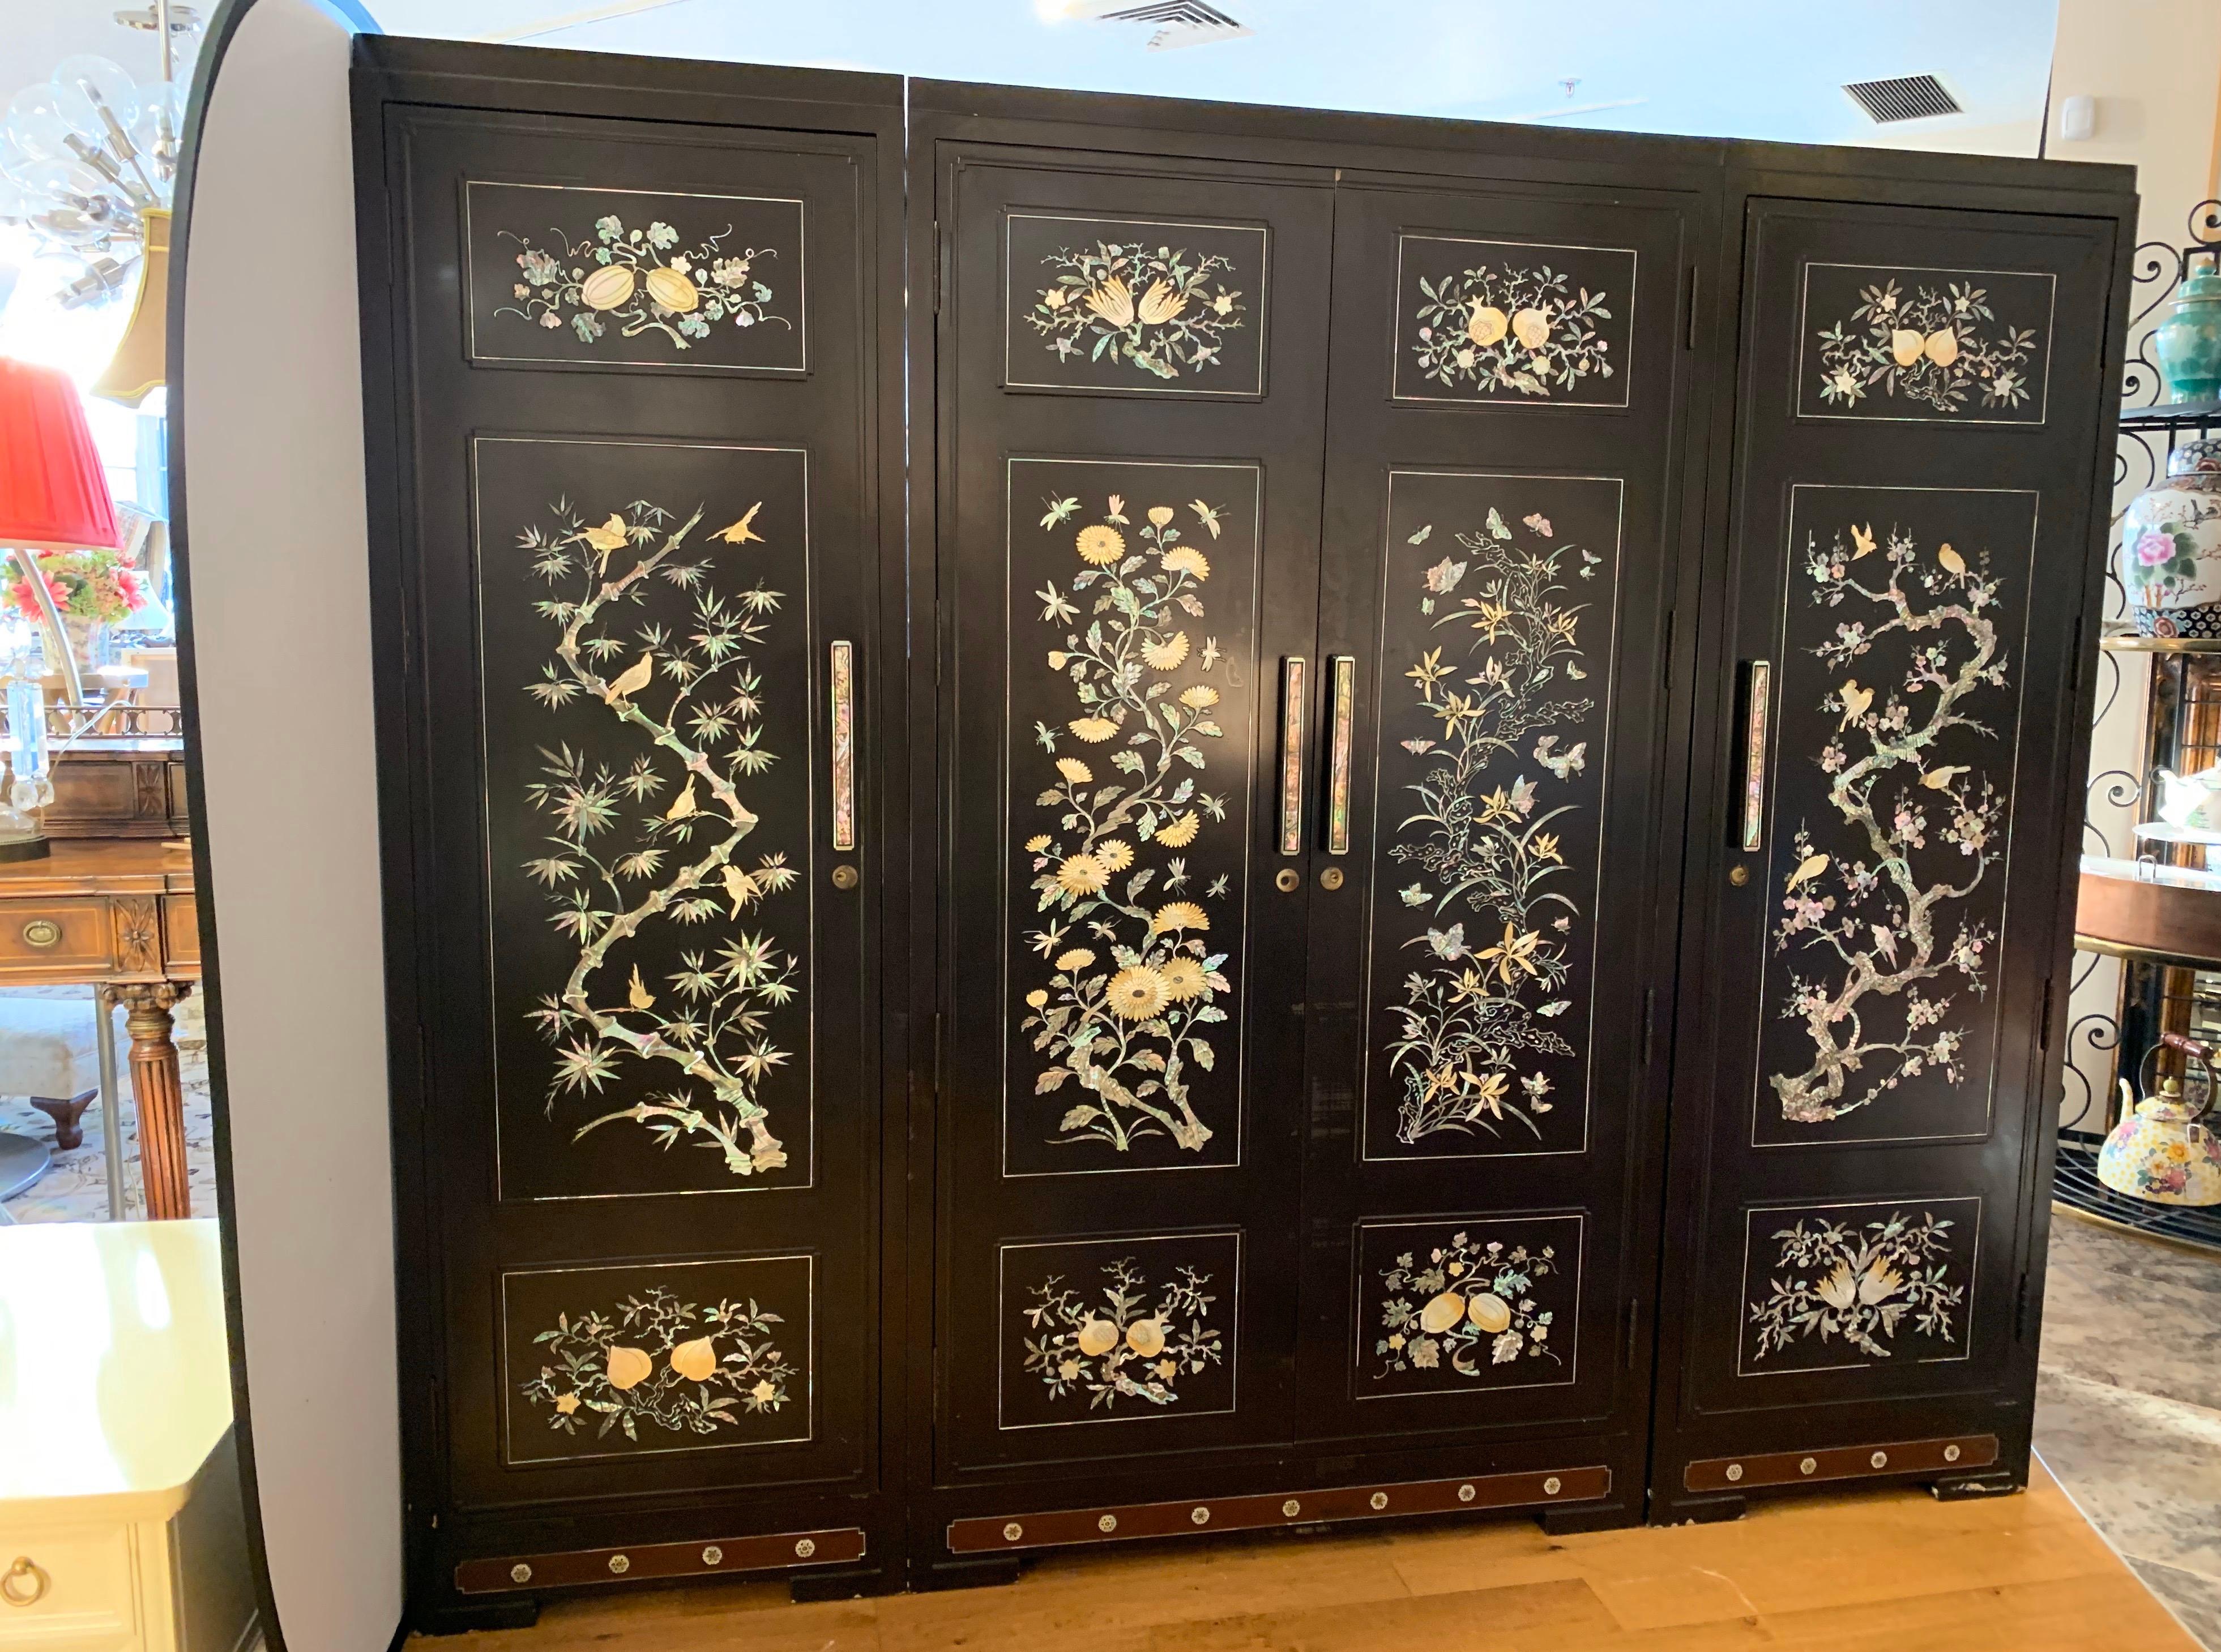 Extra large, three-piece chinoiserie black lacquer wardrobe cabinet complete with drawers and hanging rods.
Not enough closet space in your home, no problem! Features mother of pearl throughout. Interior is black lacquer with red undertones. The